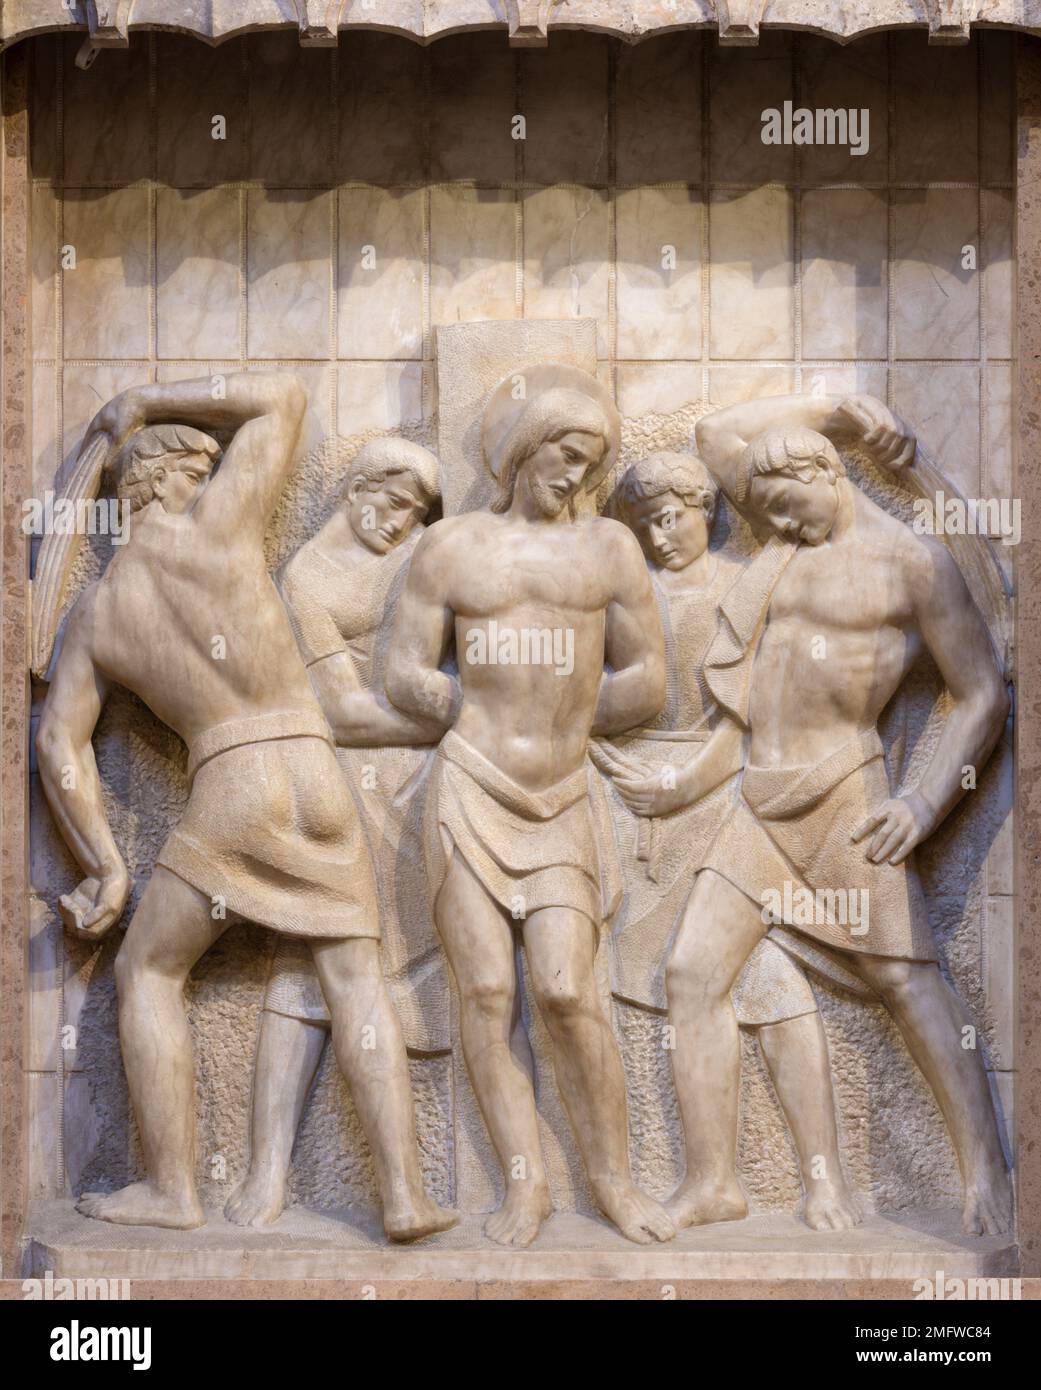 VALENCIA, SPAIN - FEBRUARY 17, 2022: The marble relief of Flagellation in the church Basilica de San Vicente Ferrer from 20. cent. Stock Photo